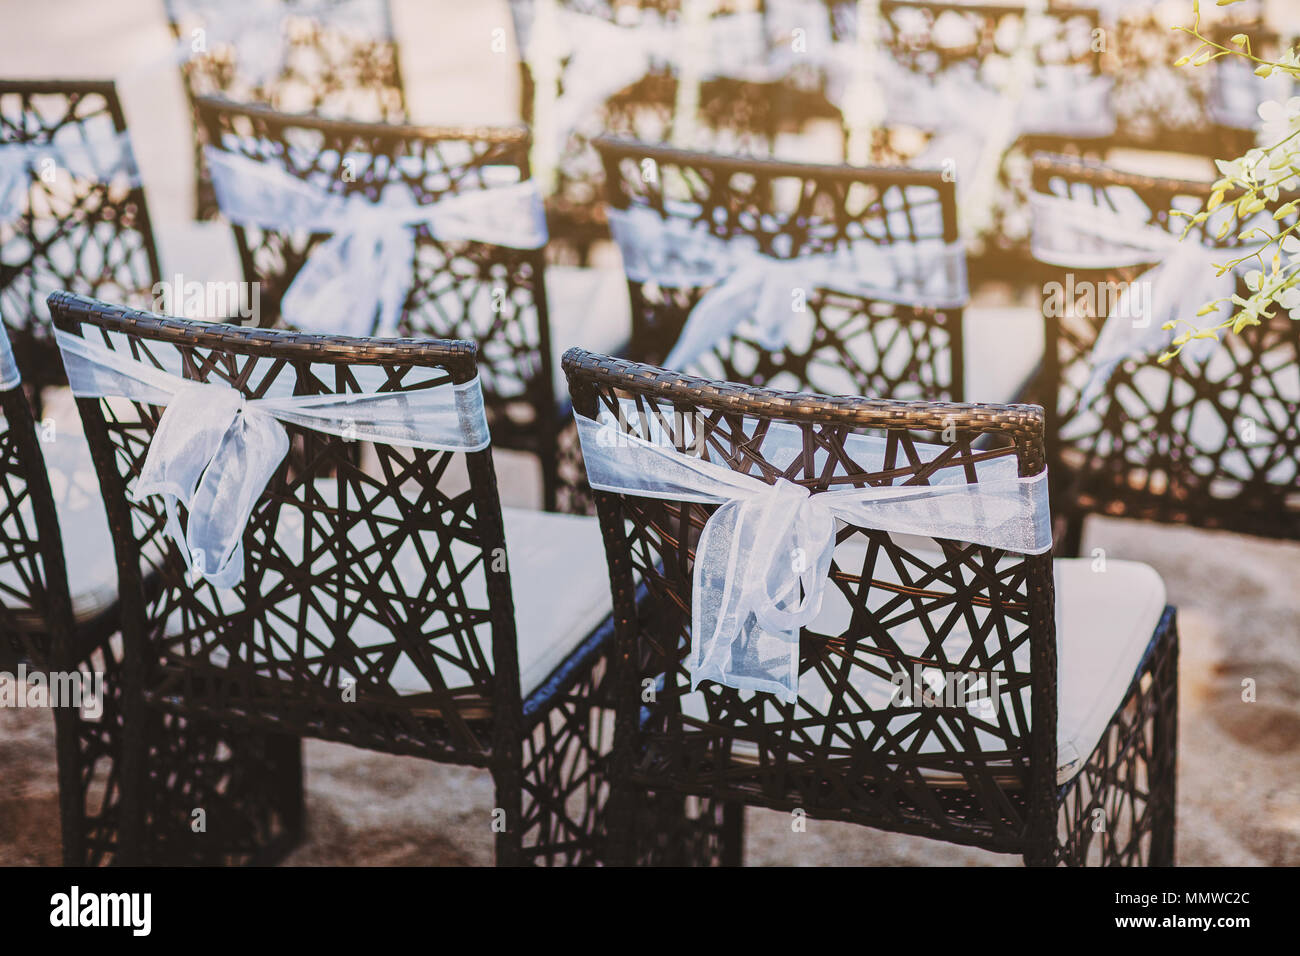 A group of black wooden chairs decorated with white organza sash for beach wedding venue before the wedding ceremony begin, retro color theme Stock Photo